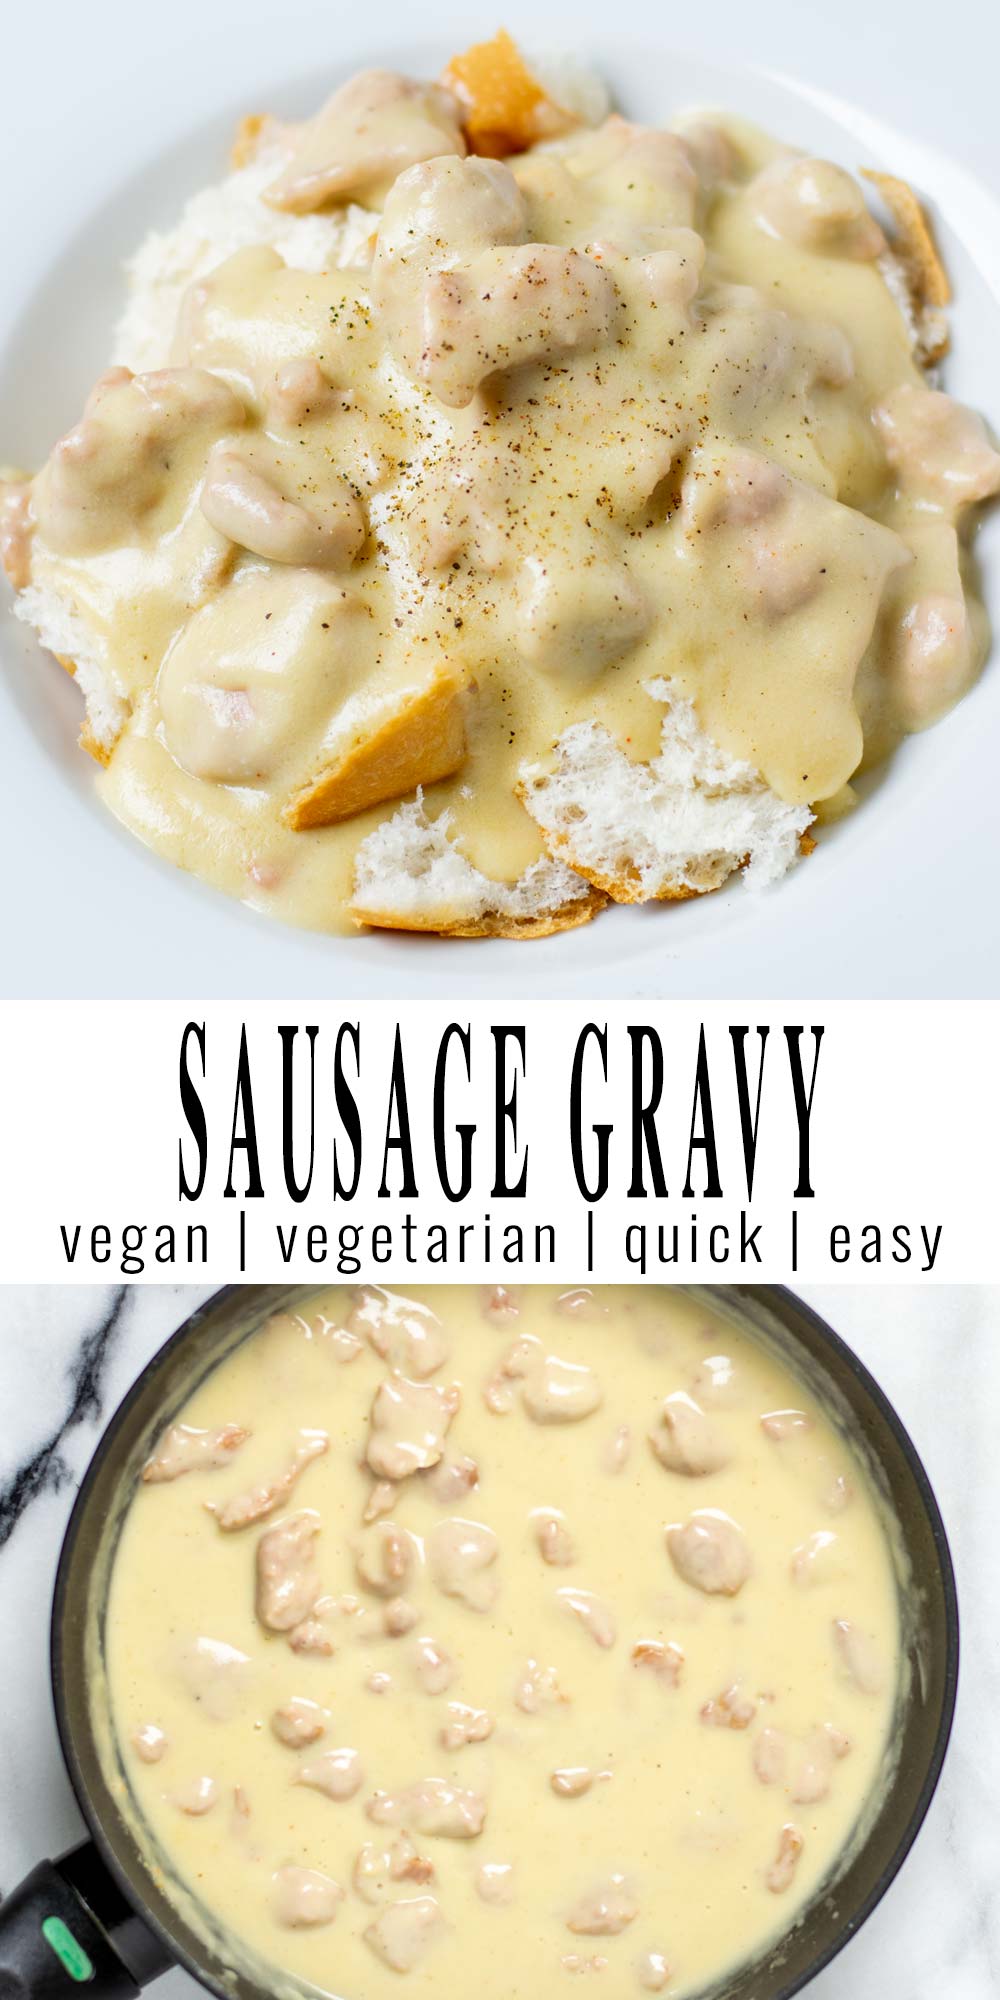 Collage of two pictures of the Sausage Gravy with recipe title text.